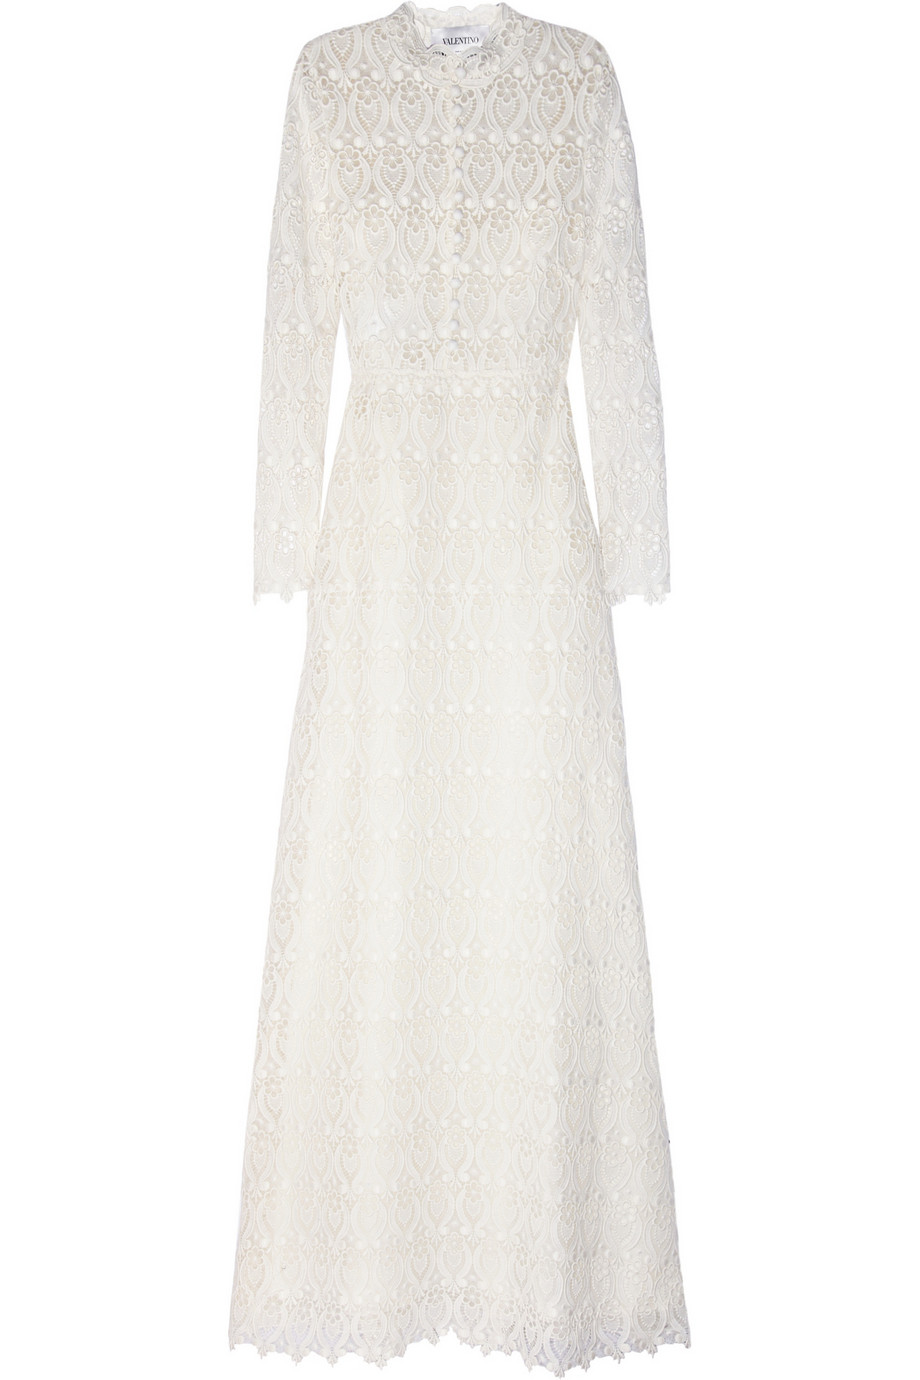 Valentino Lace Gown in White | Lyst